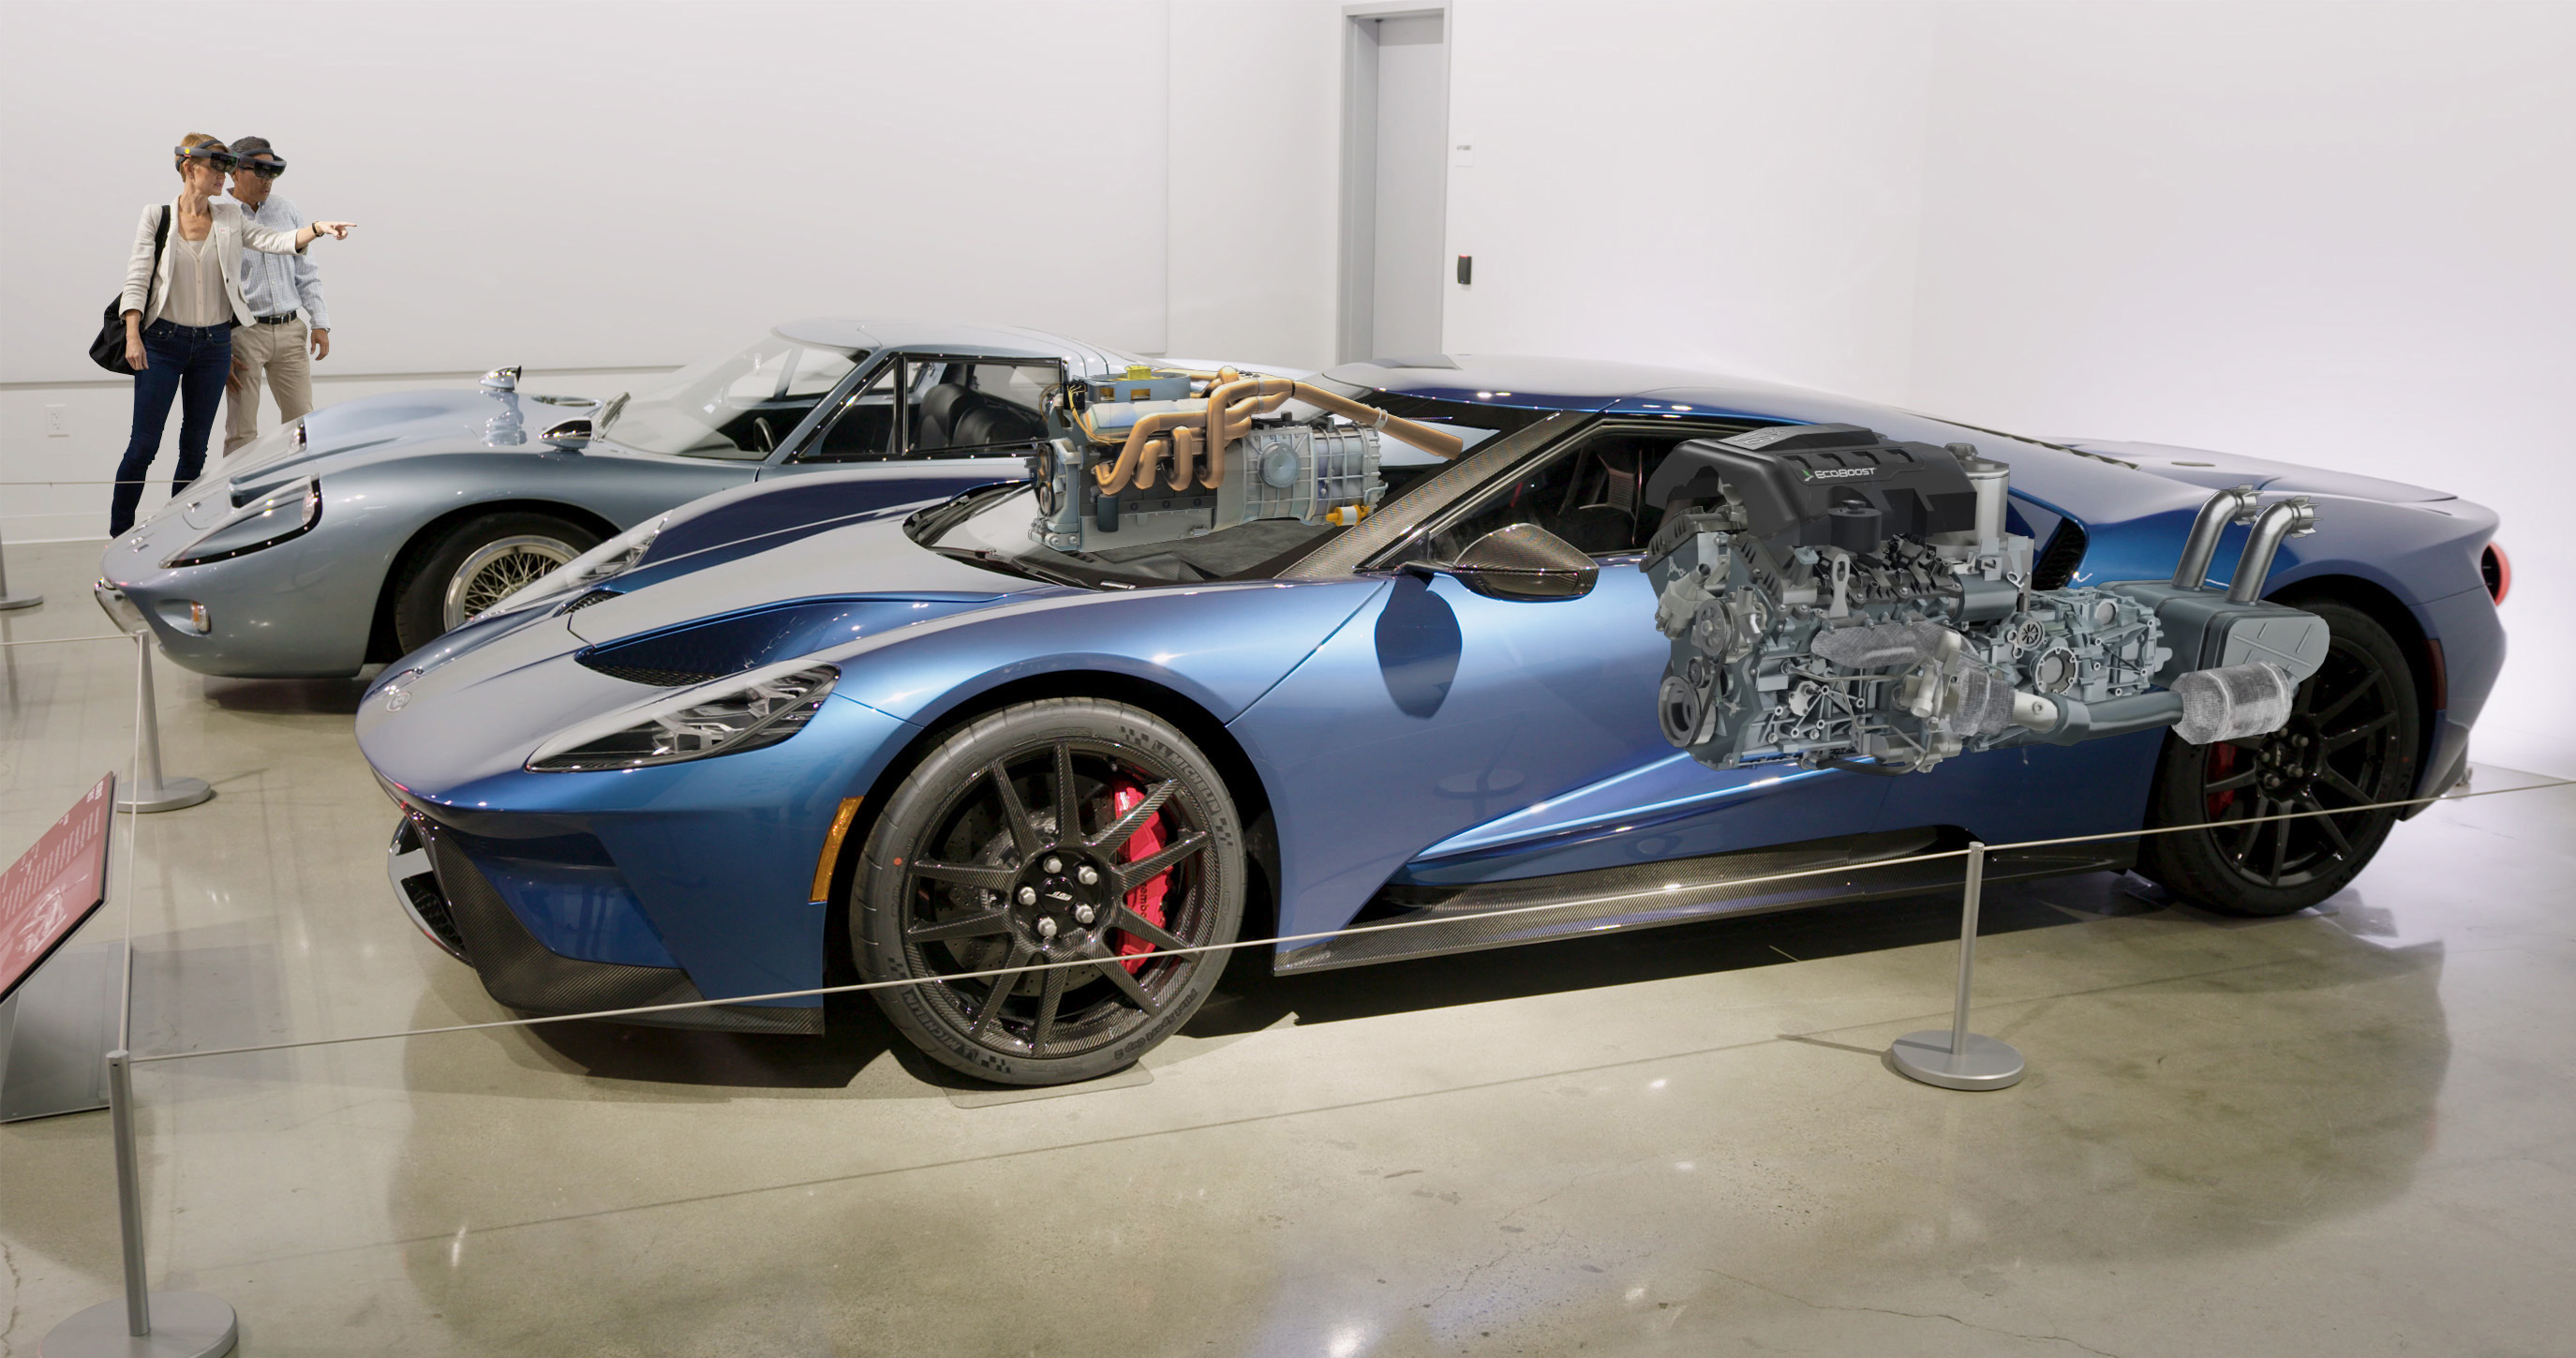 Augmented reality brings Petersen Museum vehicle exhibits to life